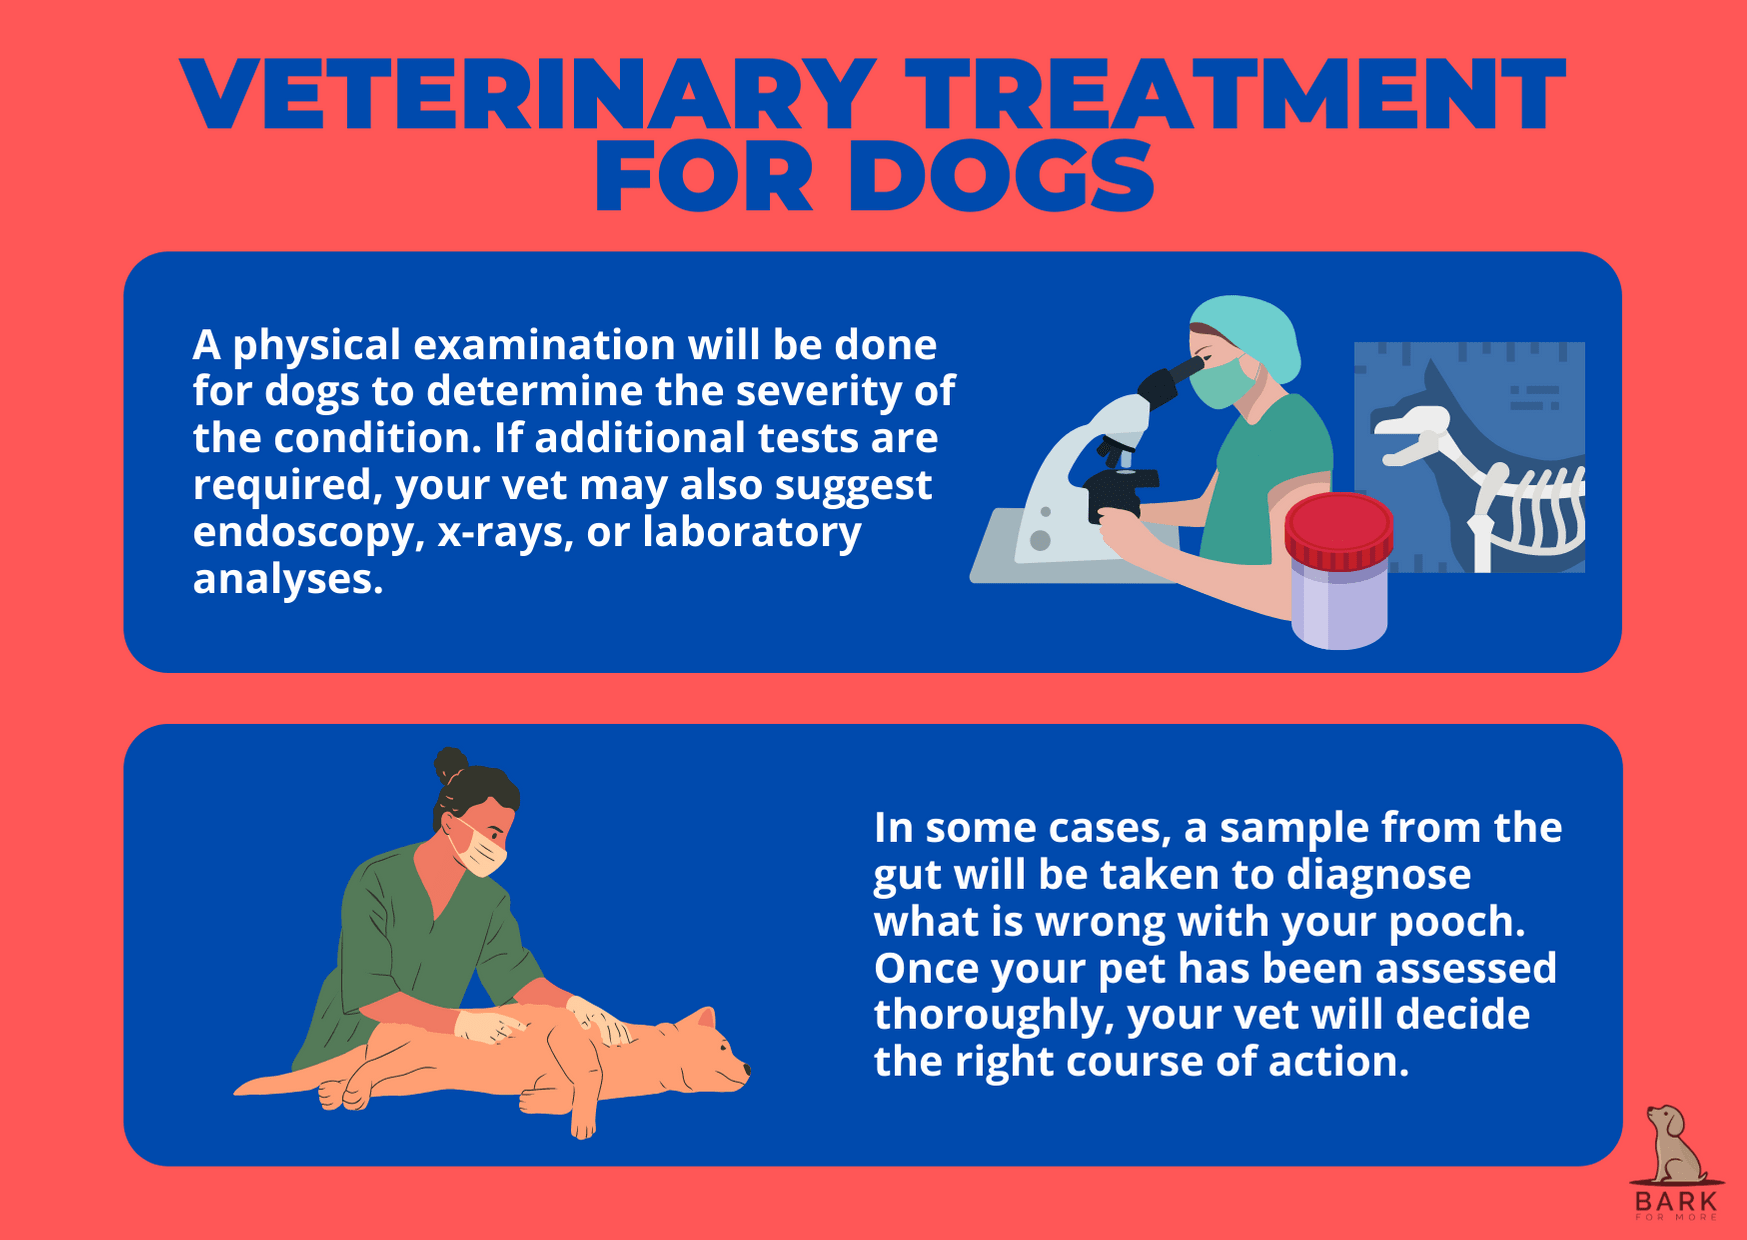 Veterinary treatment for dogs